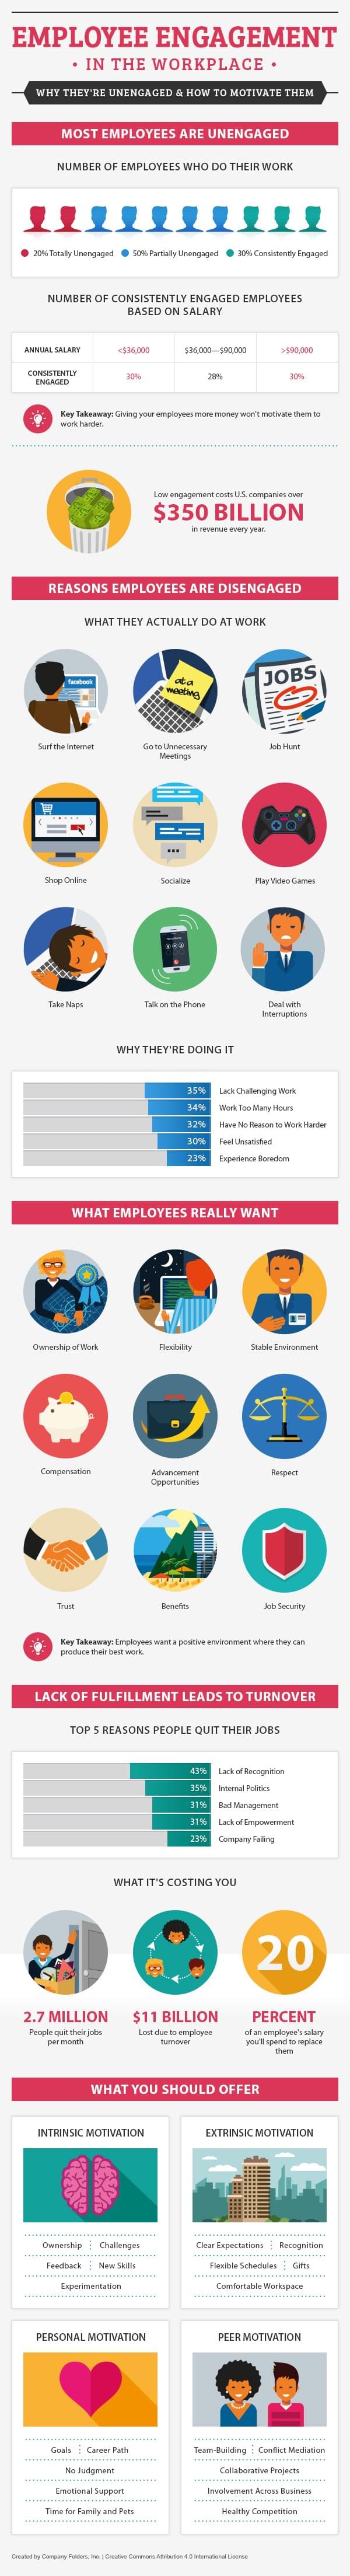 Employee Engagement in the Workplace (Infographic)